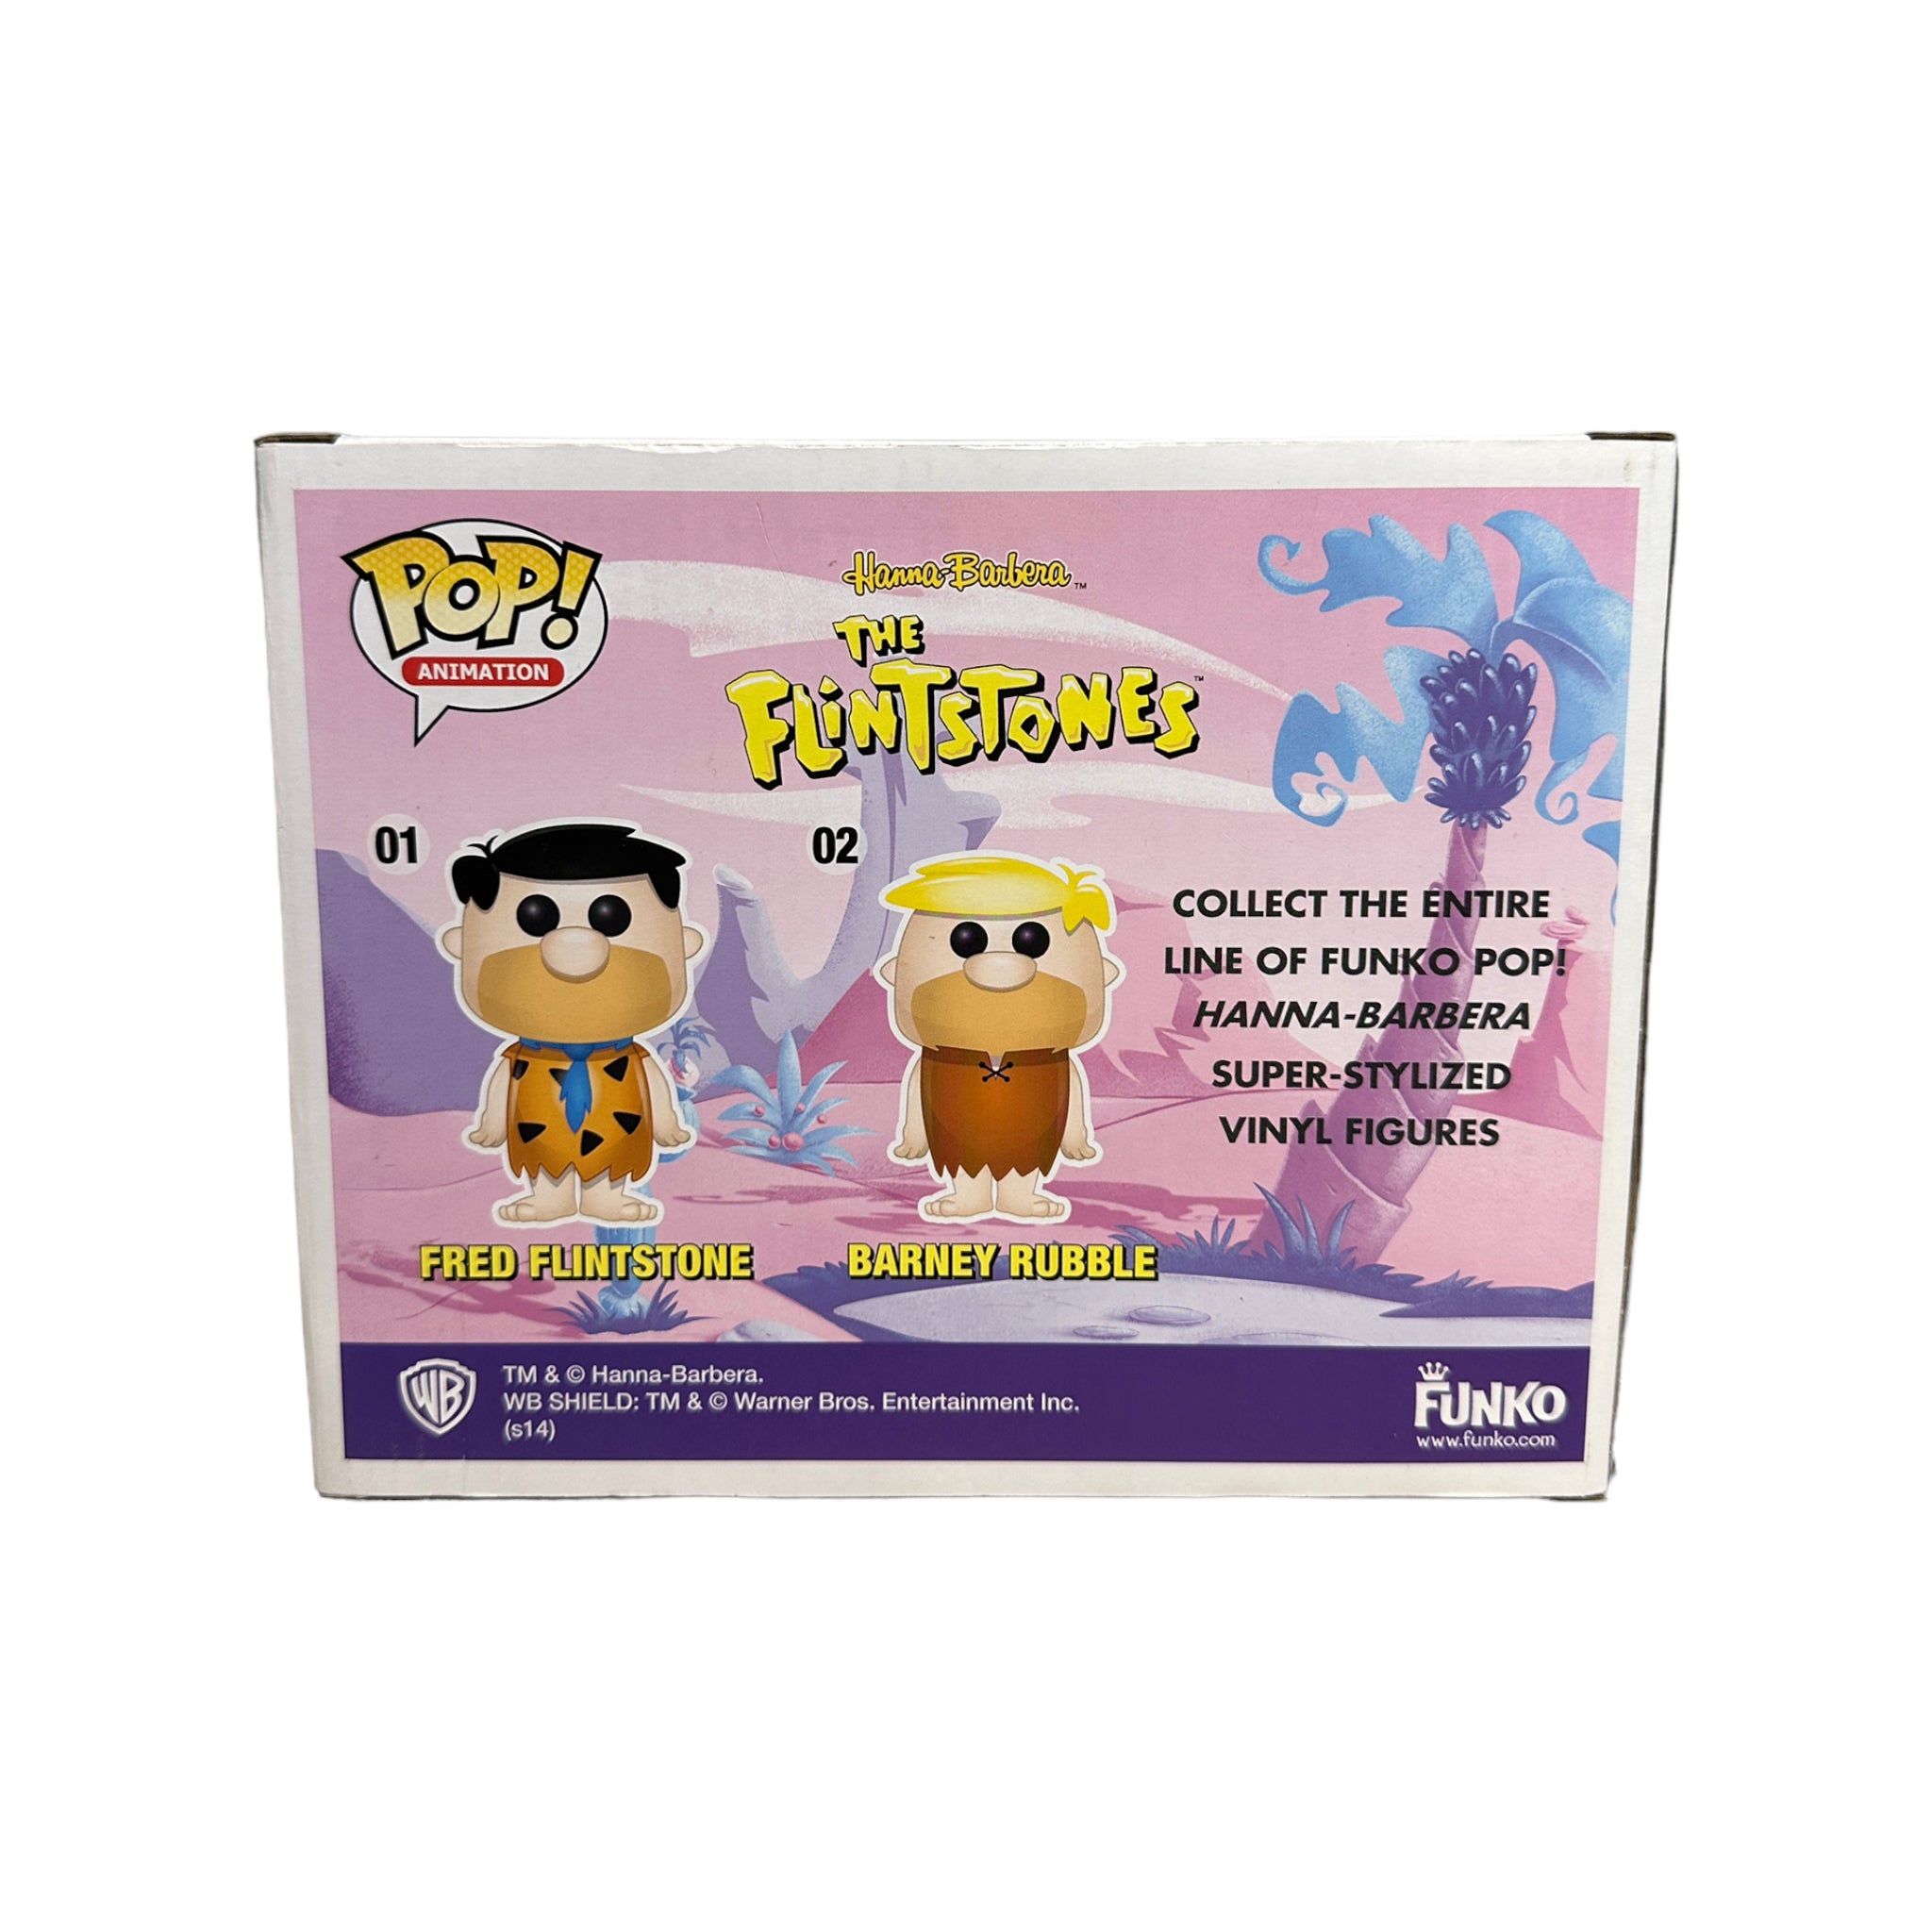 Fred & Barney (Black / Green Hair) 2 Pack Funko Pop! - The Flintstones - Gemini Collectibles Exclusive - Condition 8/10